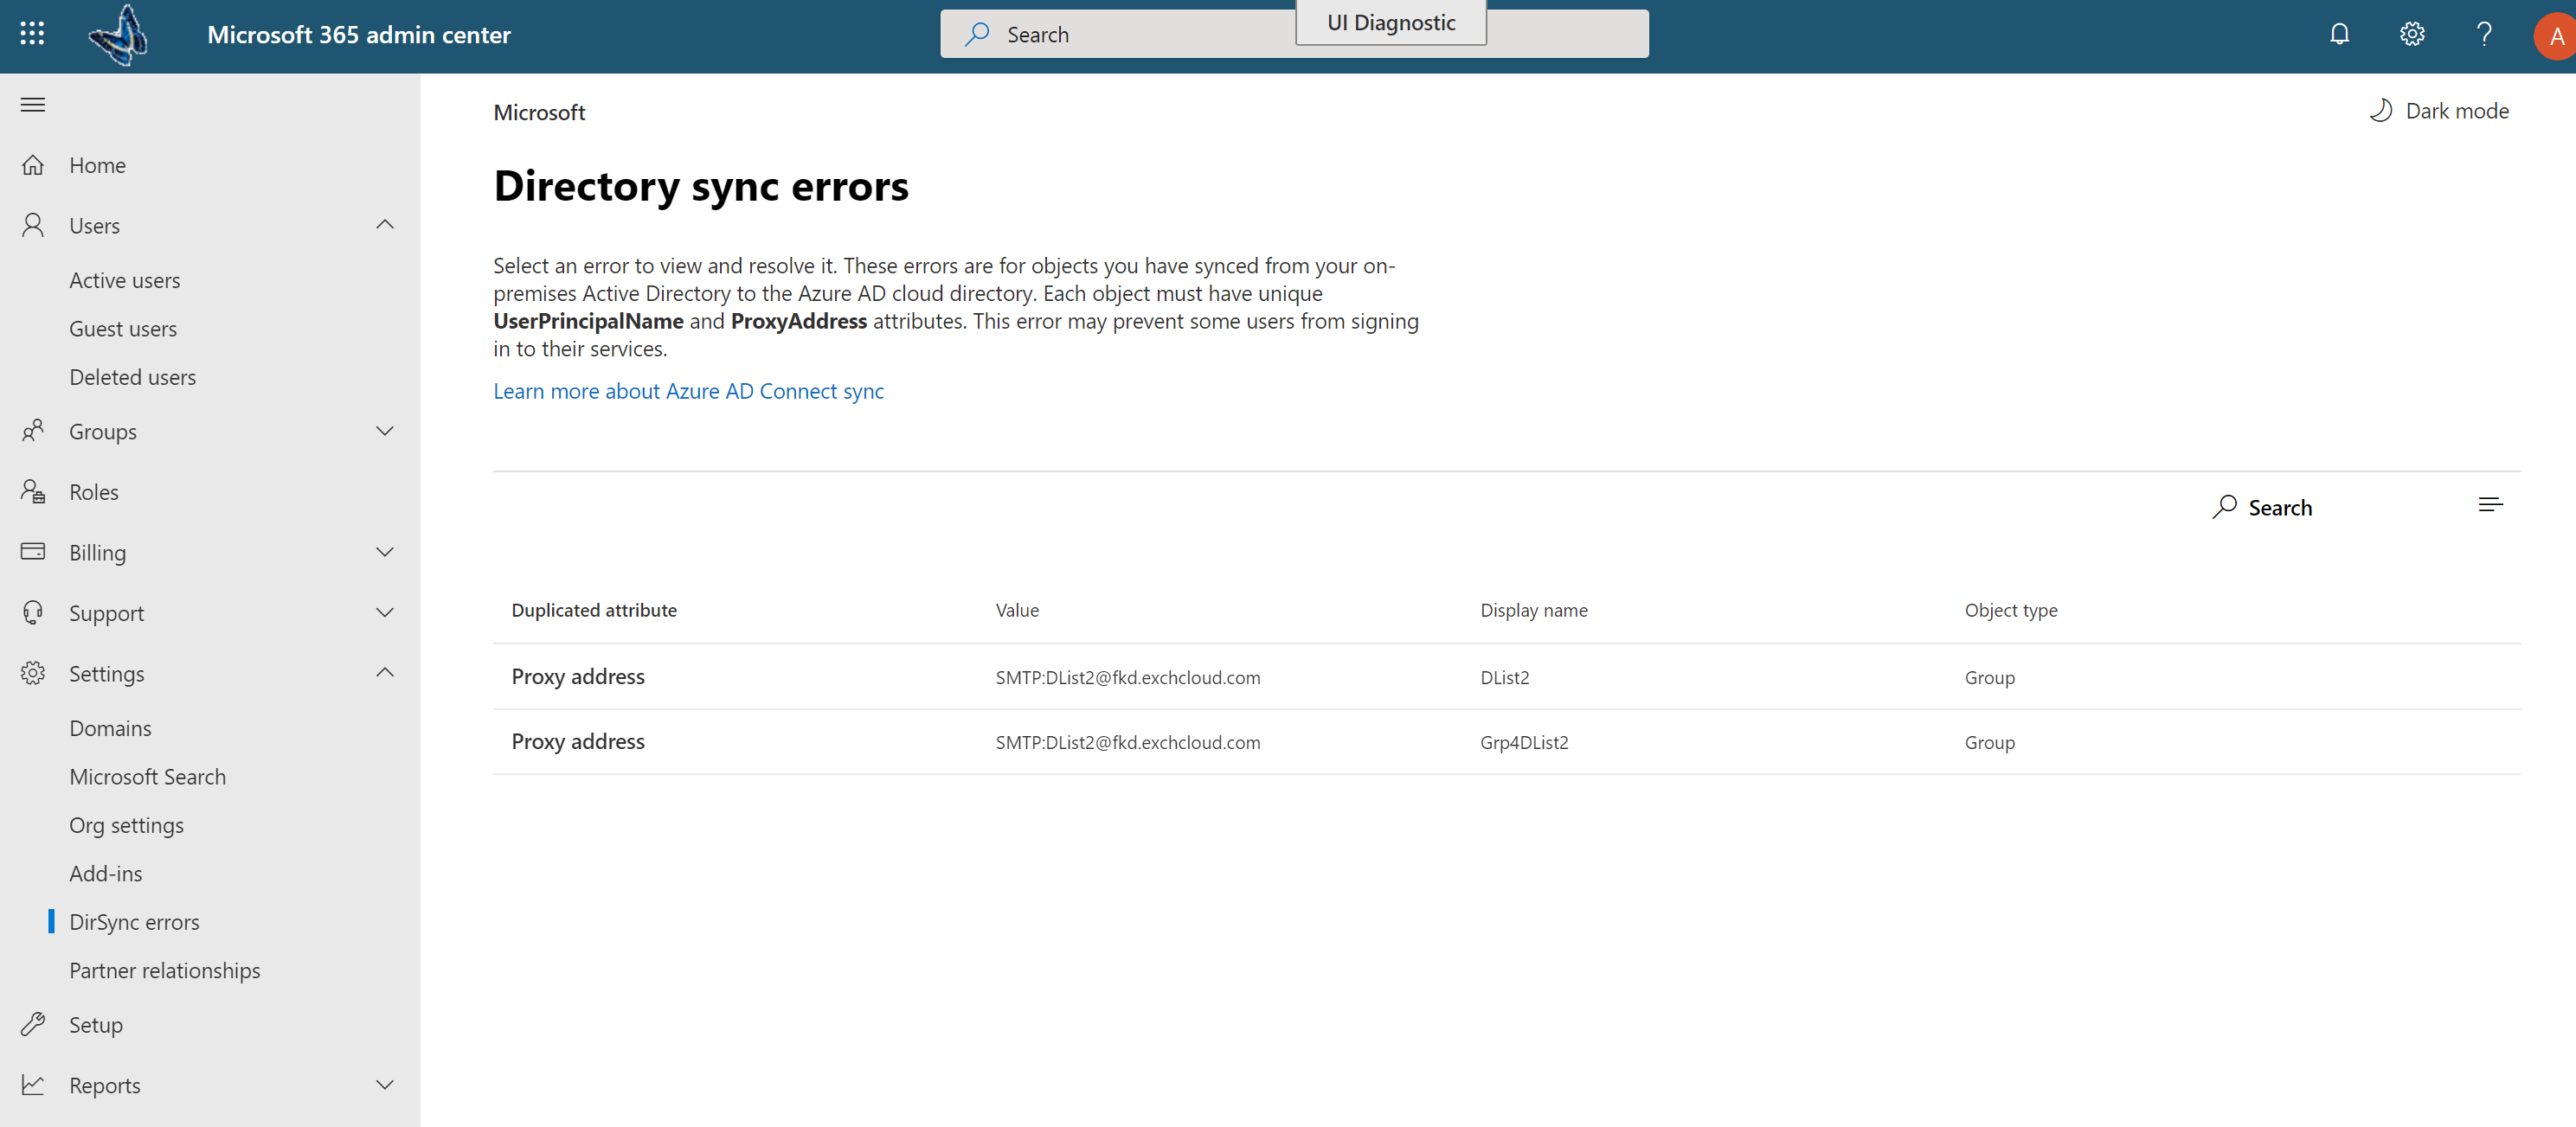 An example of the Directory sync errors page.